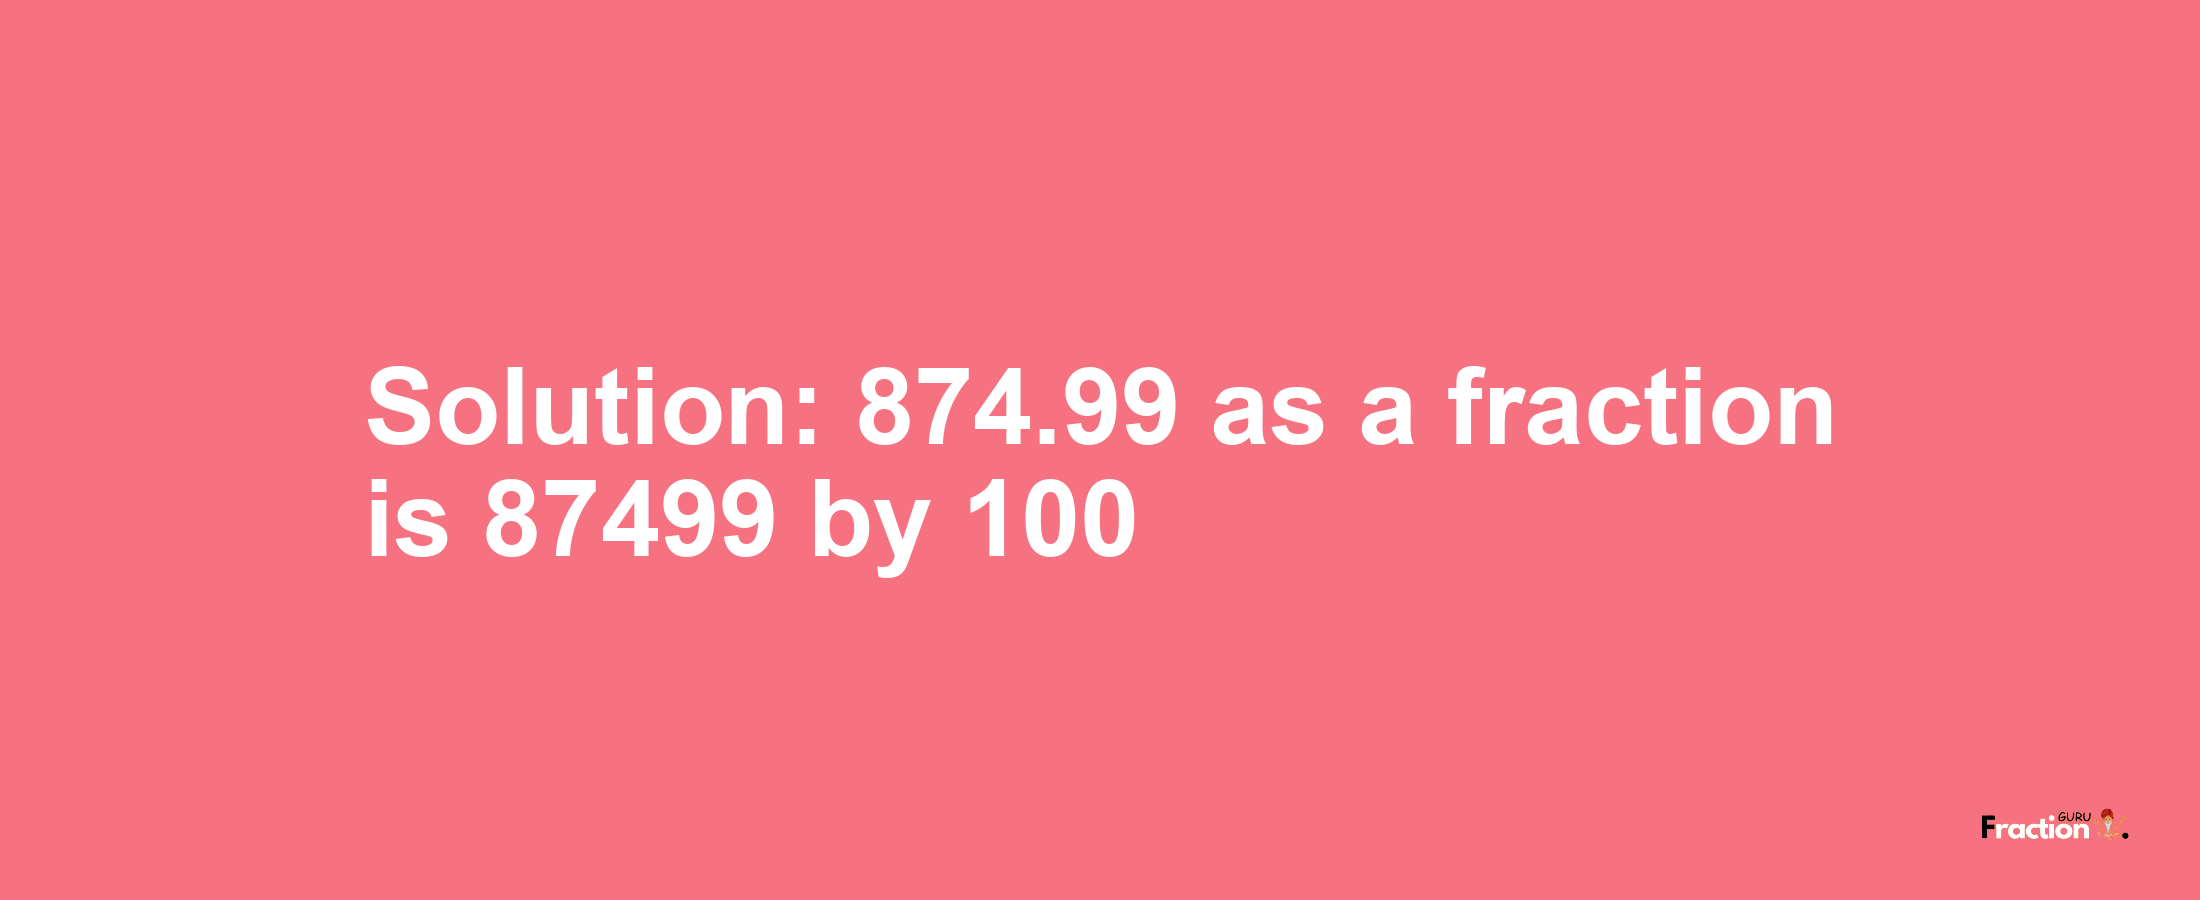 Solution:874.99 as a fraction is 87499/100